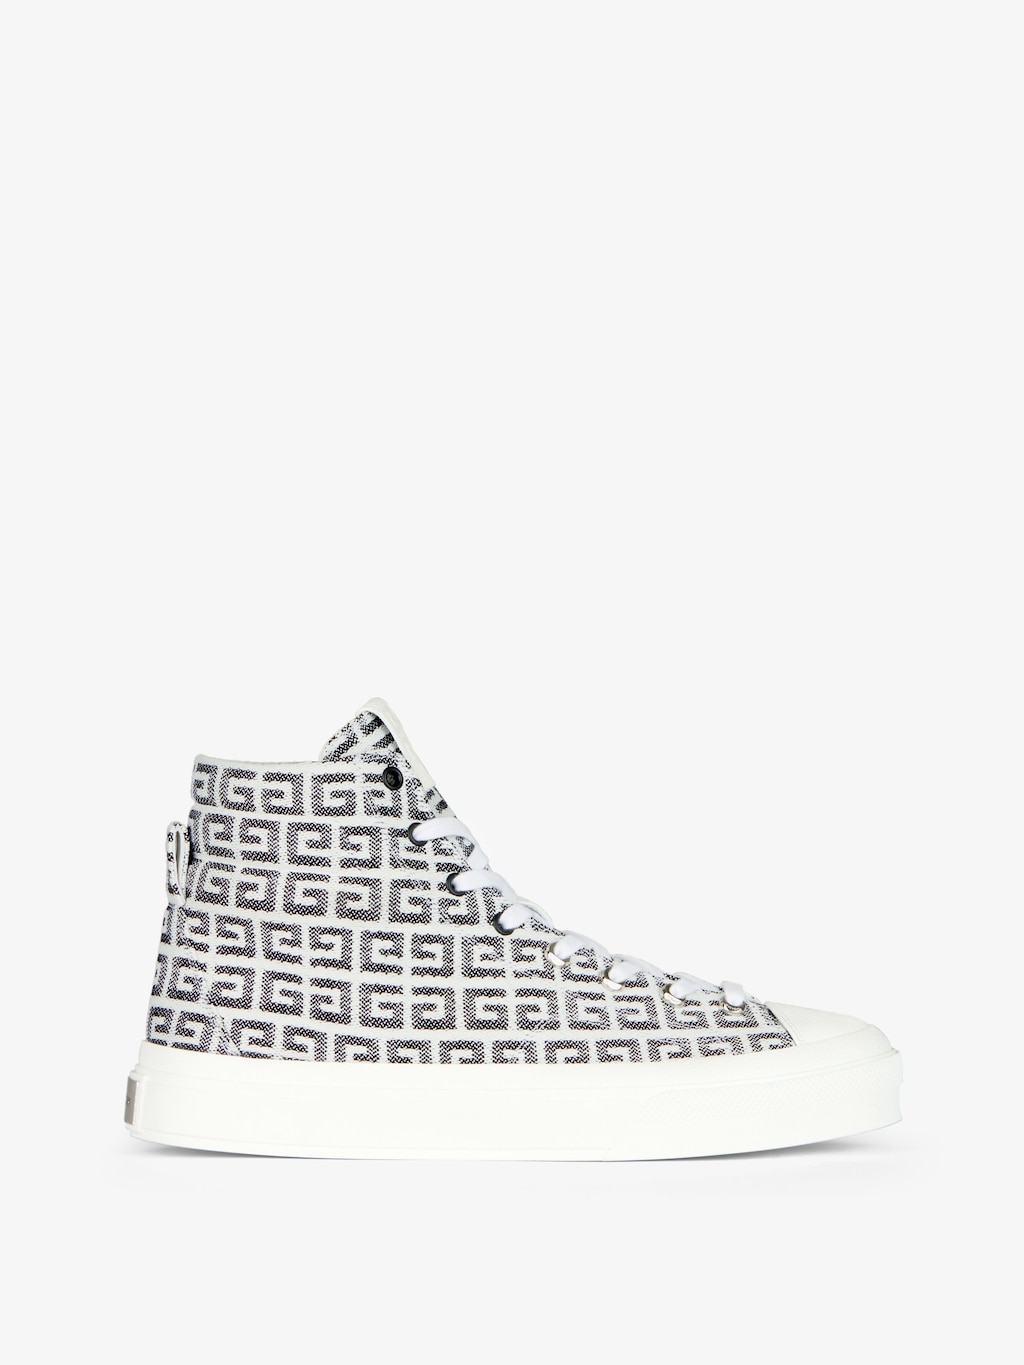 Men's Luxury Designer Sneakers & High Top Shoes | Givenchy US